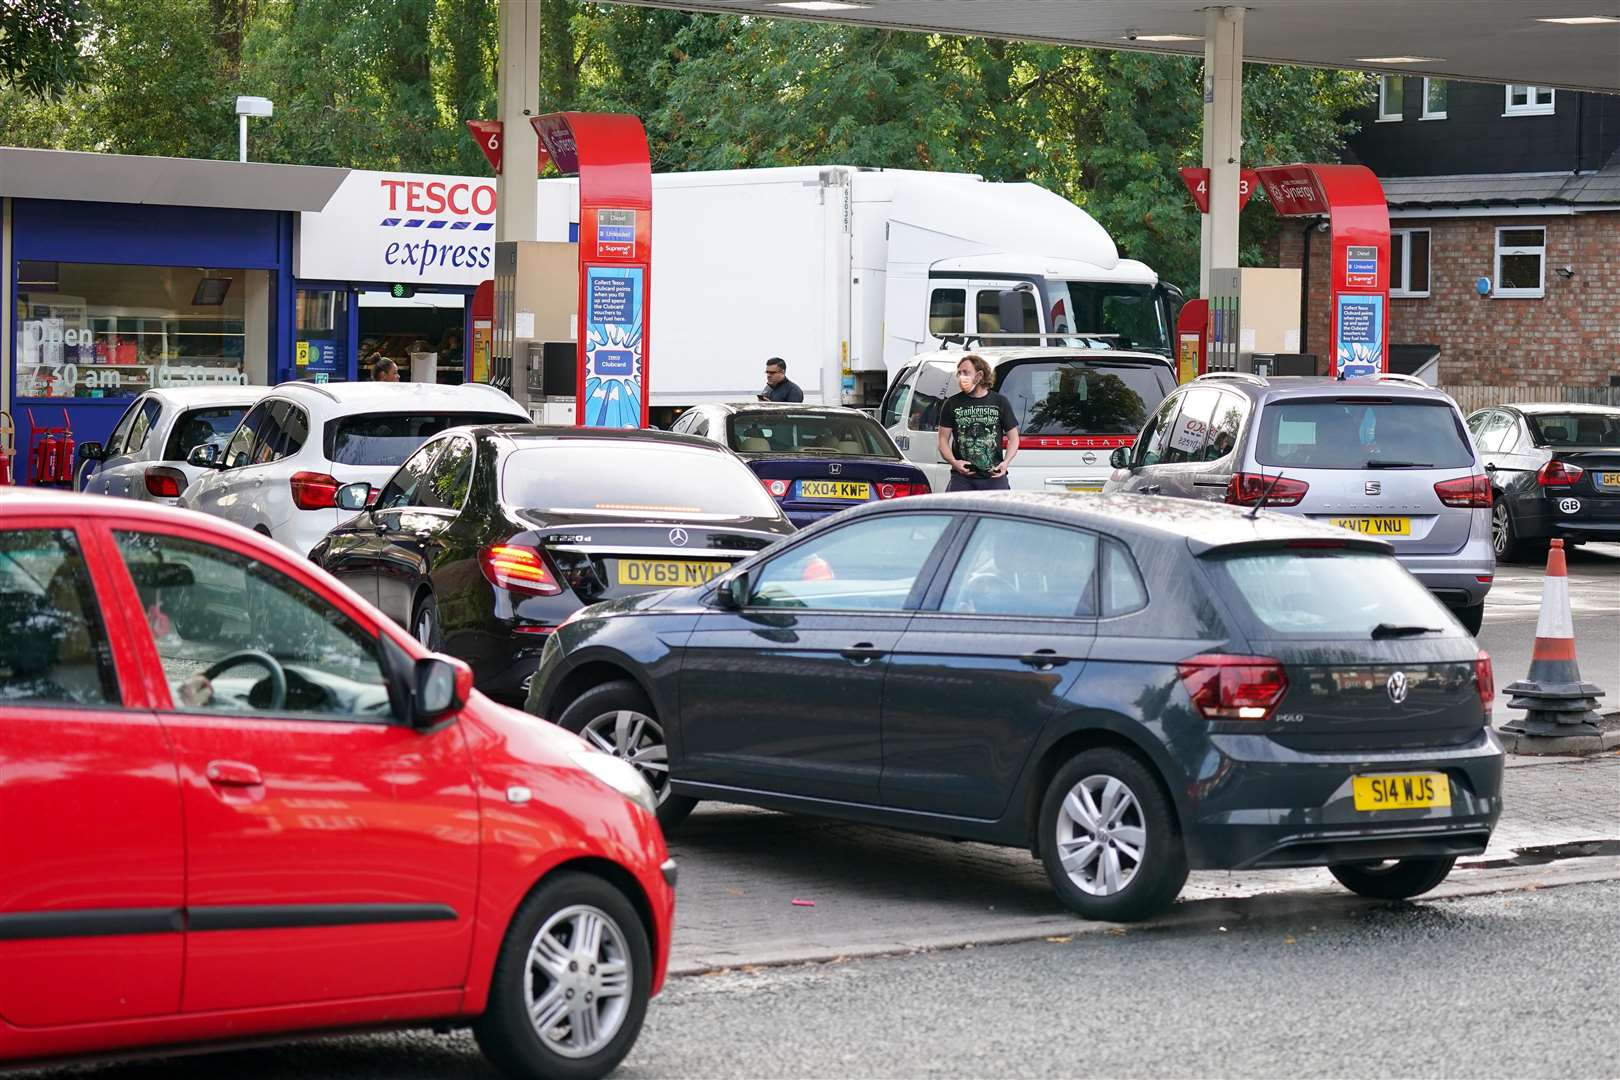 Drivers queue for fuel at an Esso petrol station in Bournville, Birmingham (Jacob King/PA)